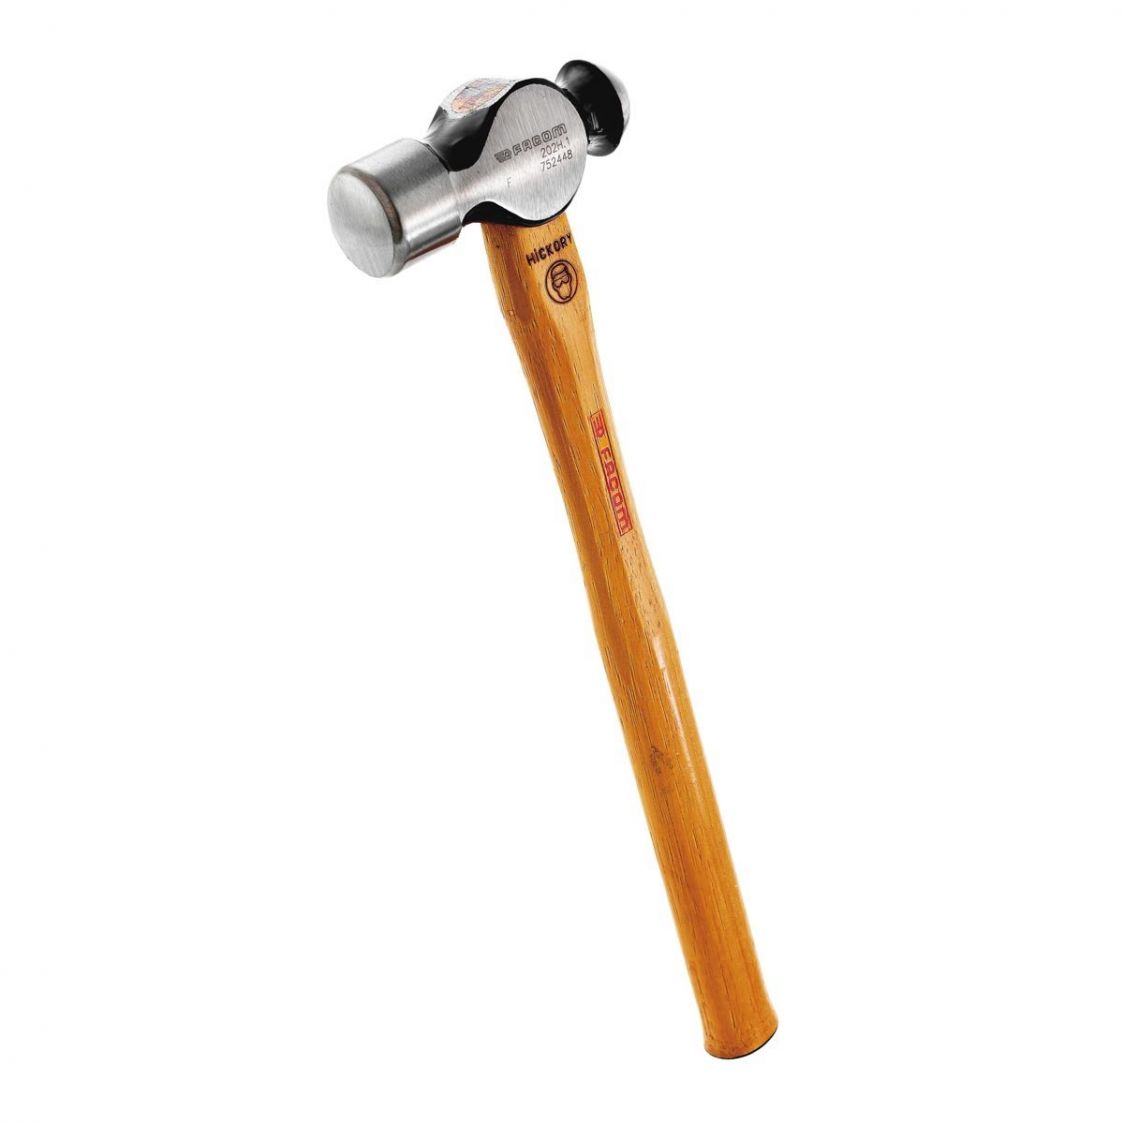 FACOM 202H.X - Ball Pein Engineers Hickory Handle Hammer